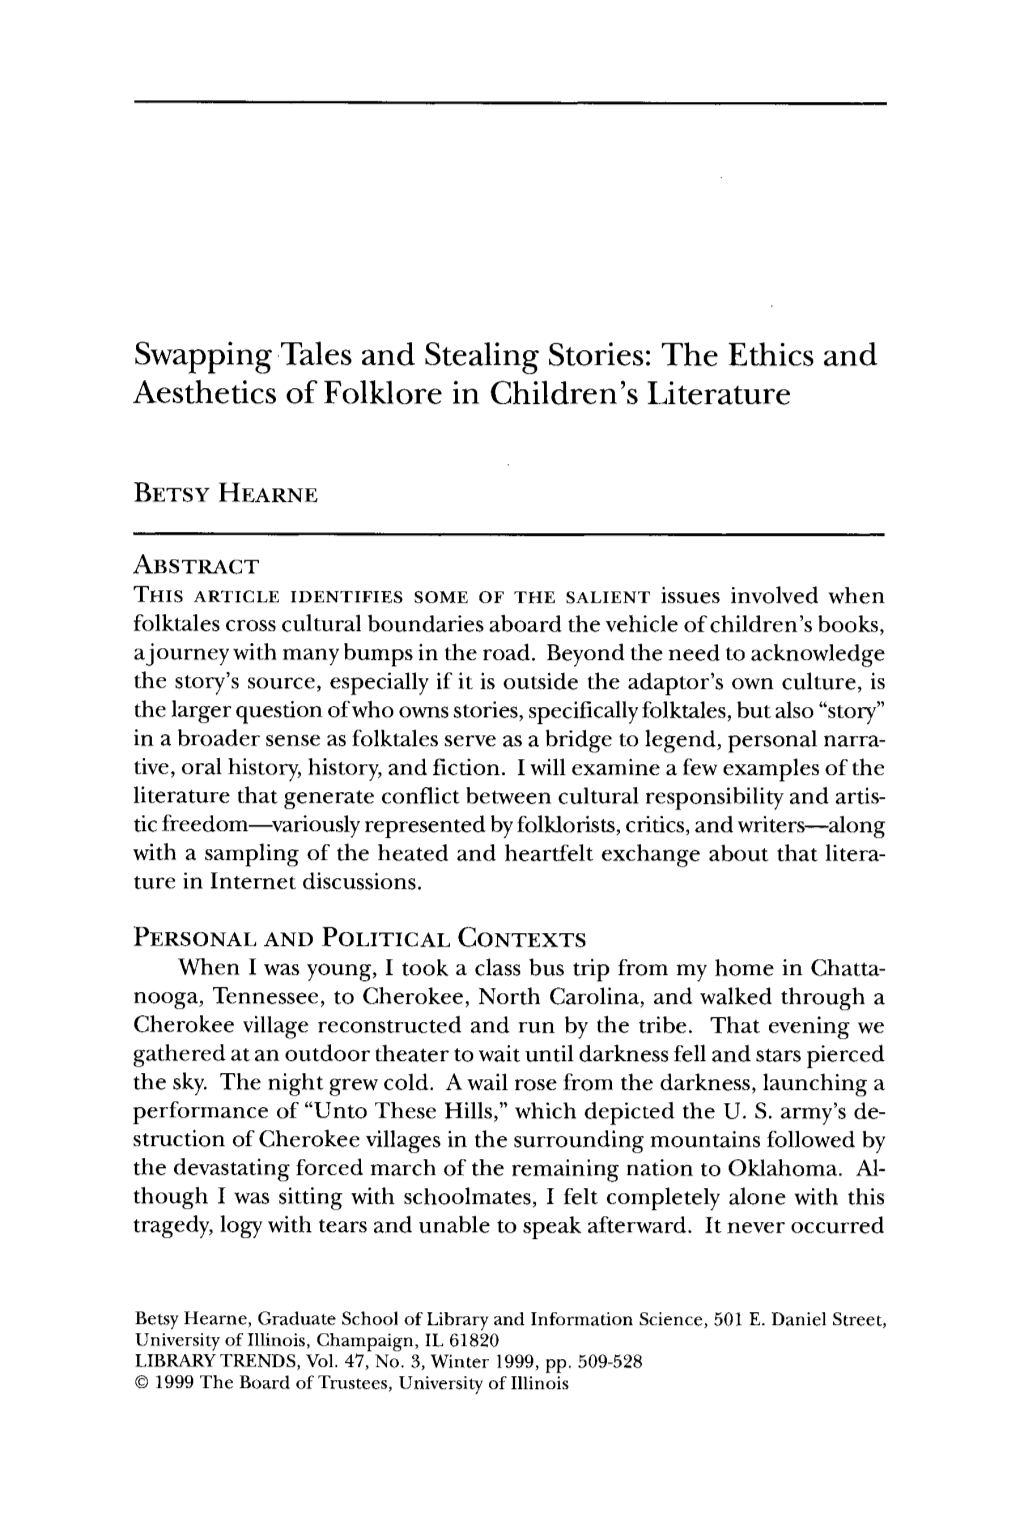 The Ethics and Aesthetics of Folklore in Children's Literature